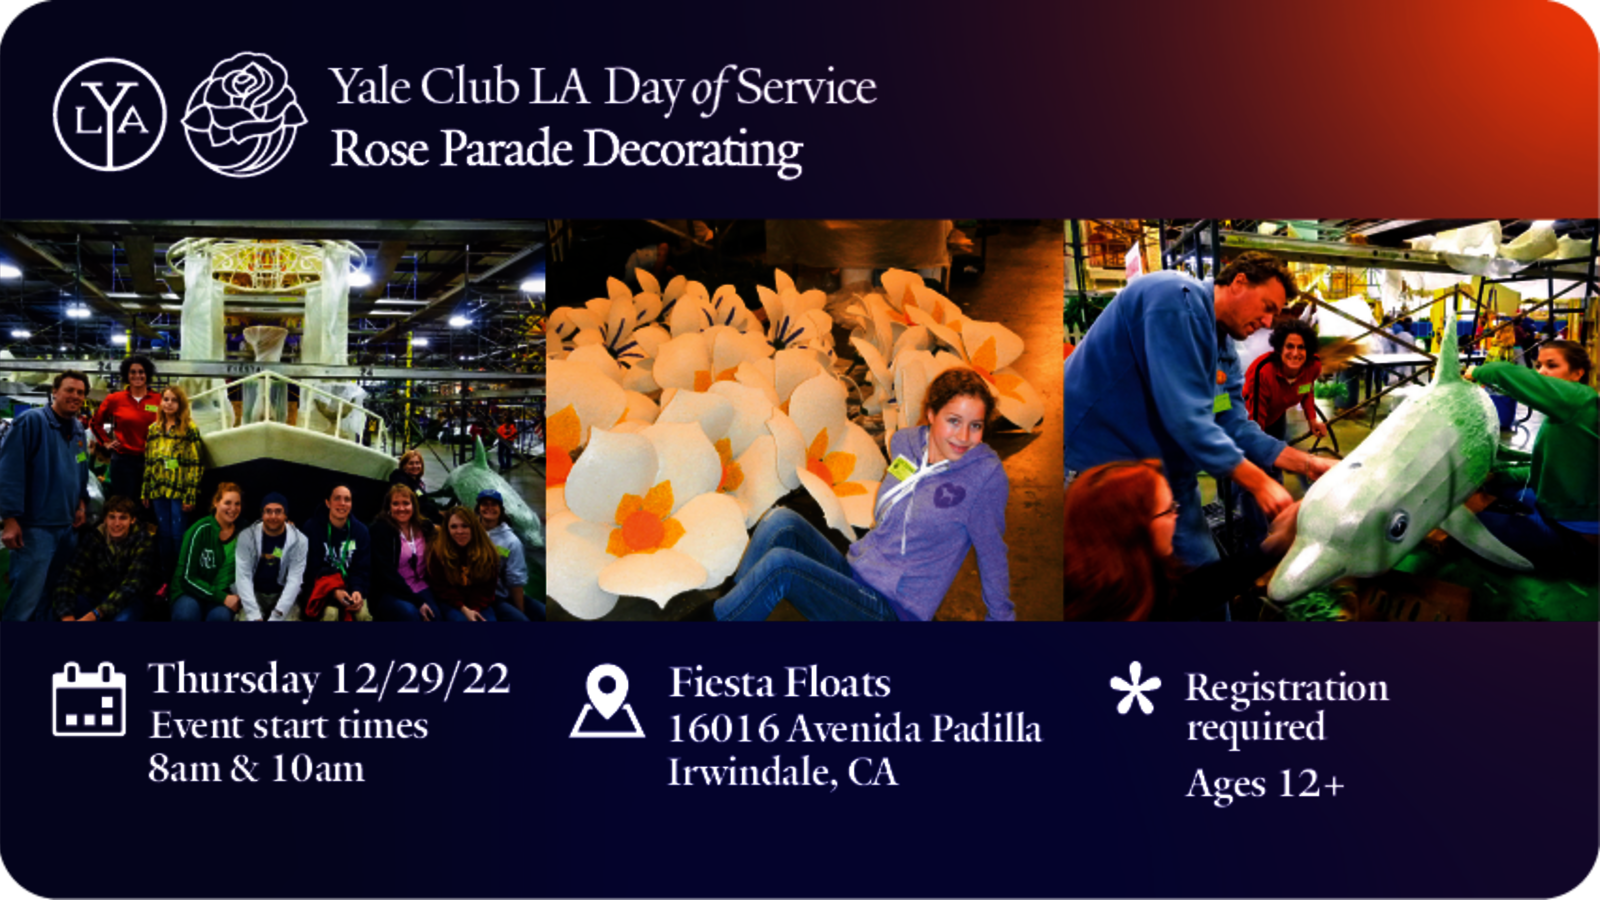 people decorating rose parade floats